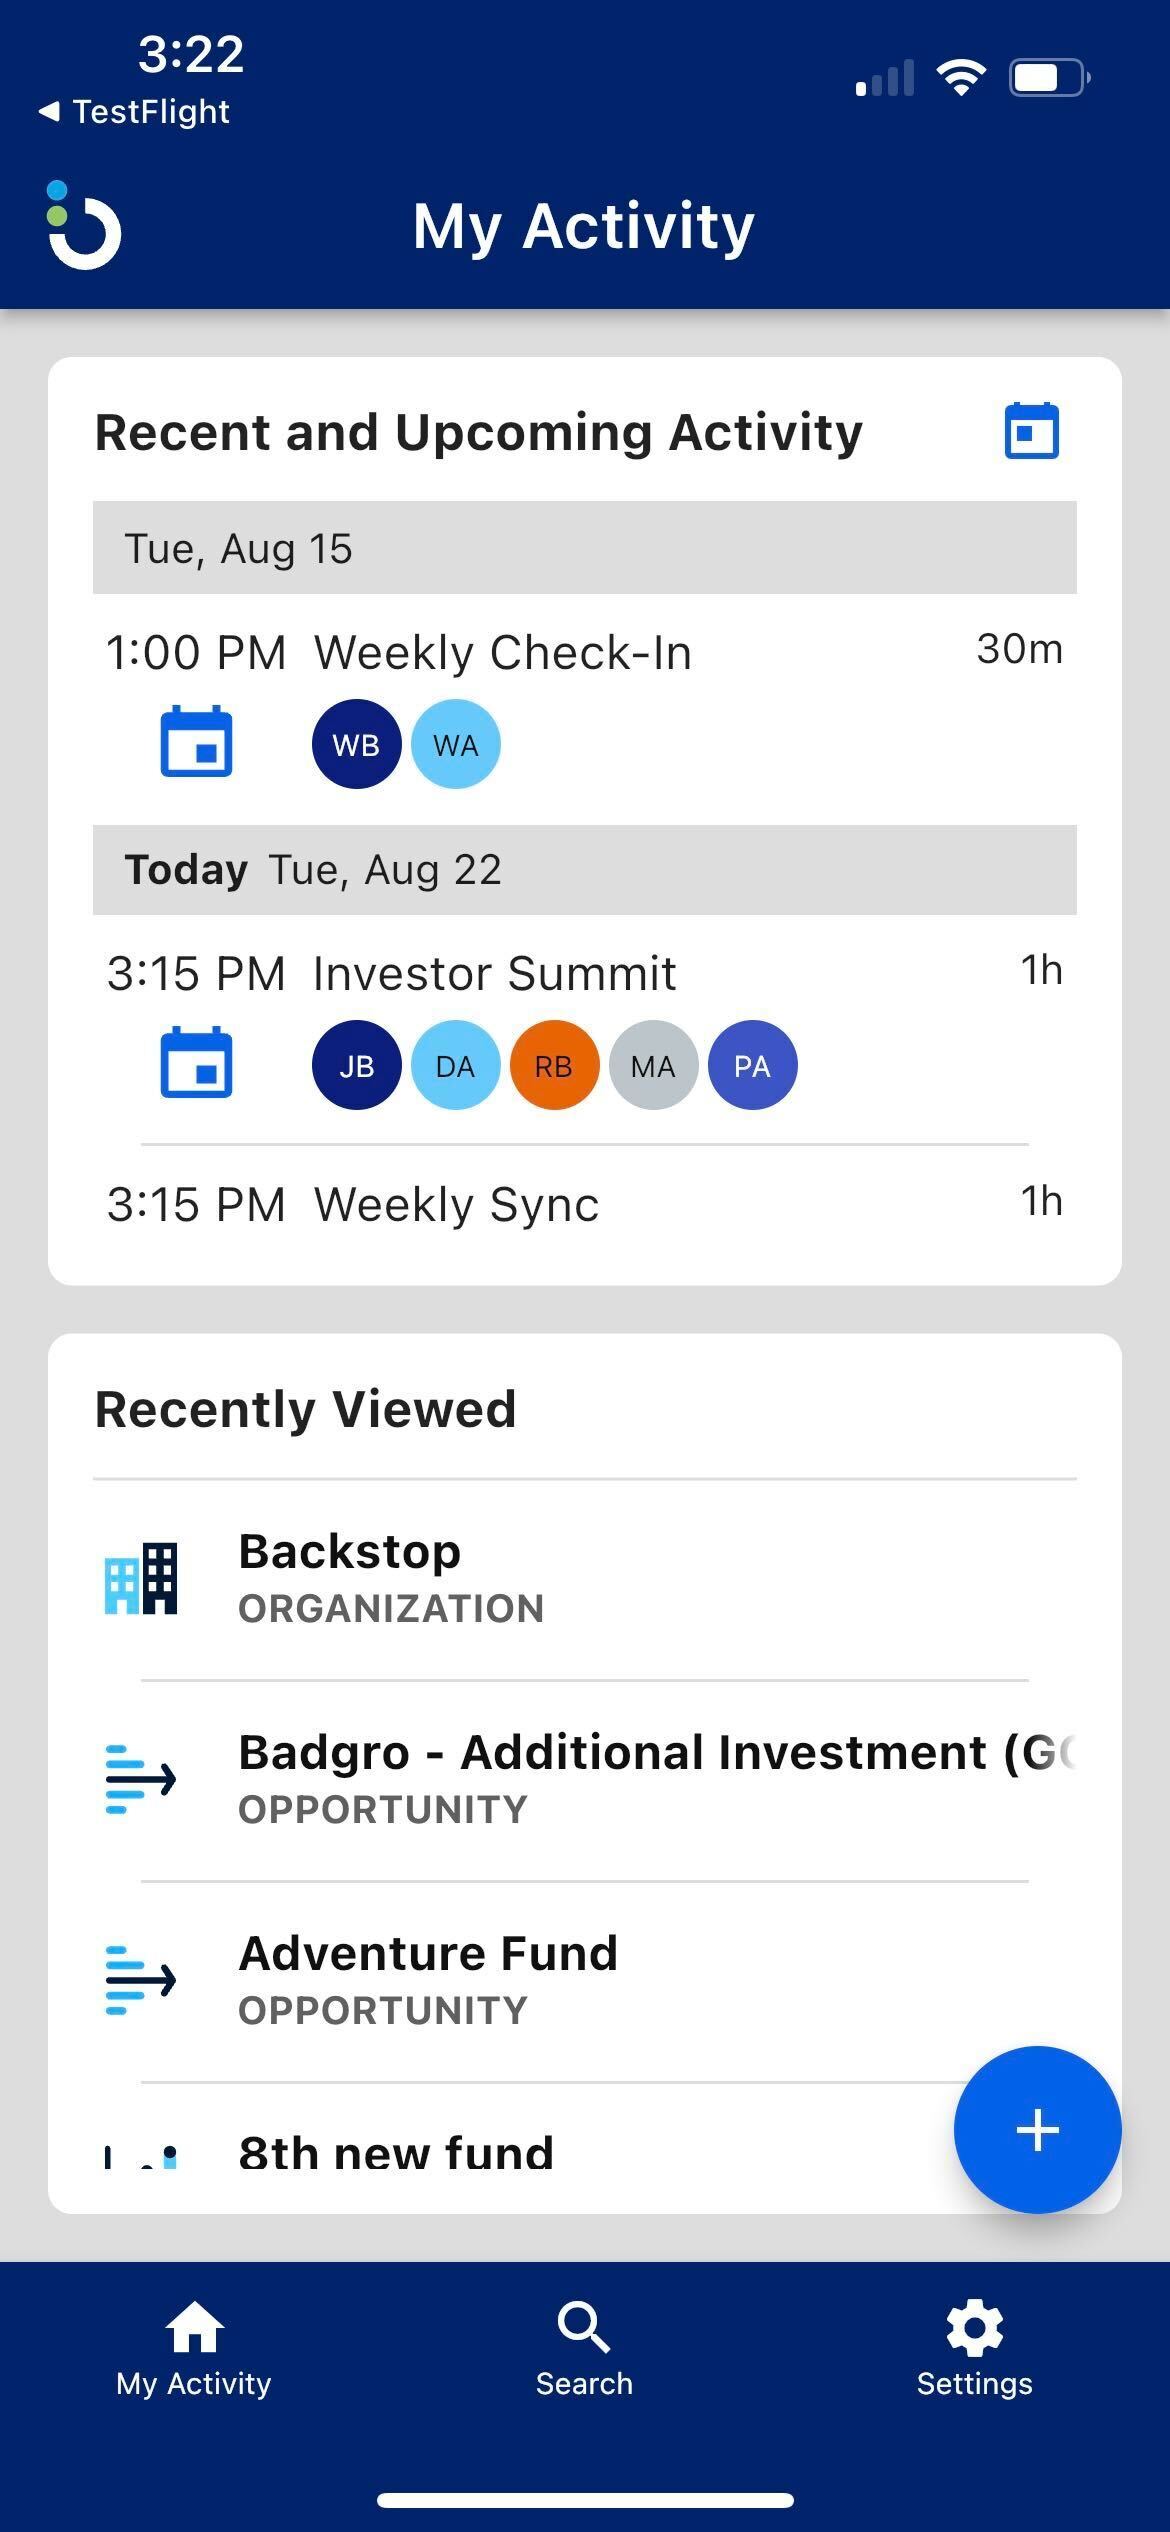 Work on the go with Backstop mobile - Transform your work away from your desktop with our new Backstop Mobile app. Access crucial information, manage contacts, connect to Google Maps, and add meeting notes all from the convenience of your smart phone.